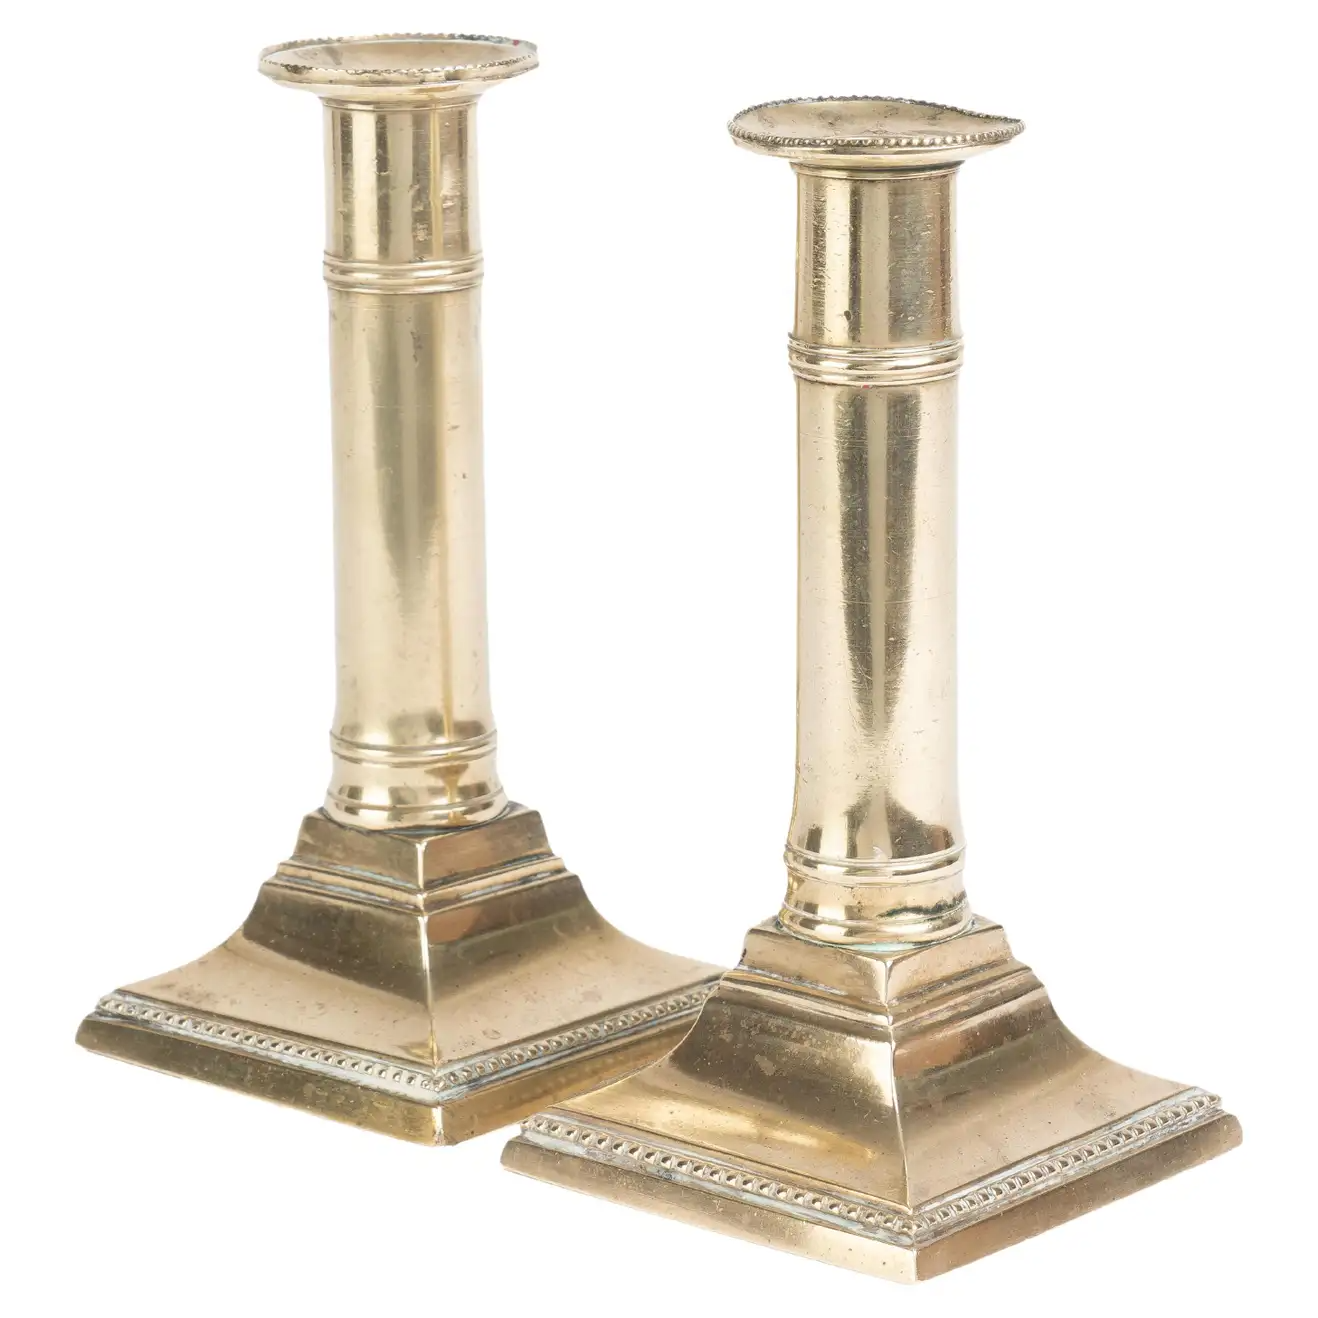 Pair of English Cast Brass Columnar Candle Sticks on a Square Base, 1810